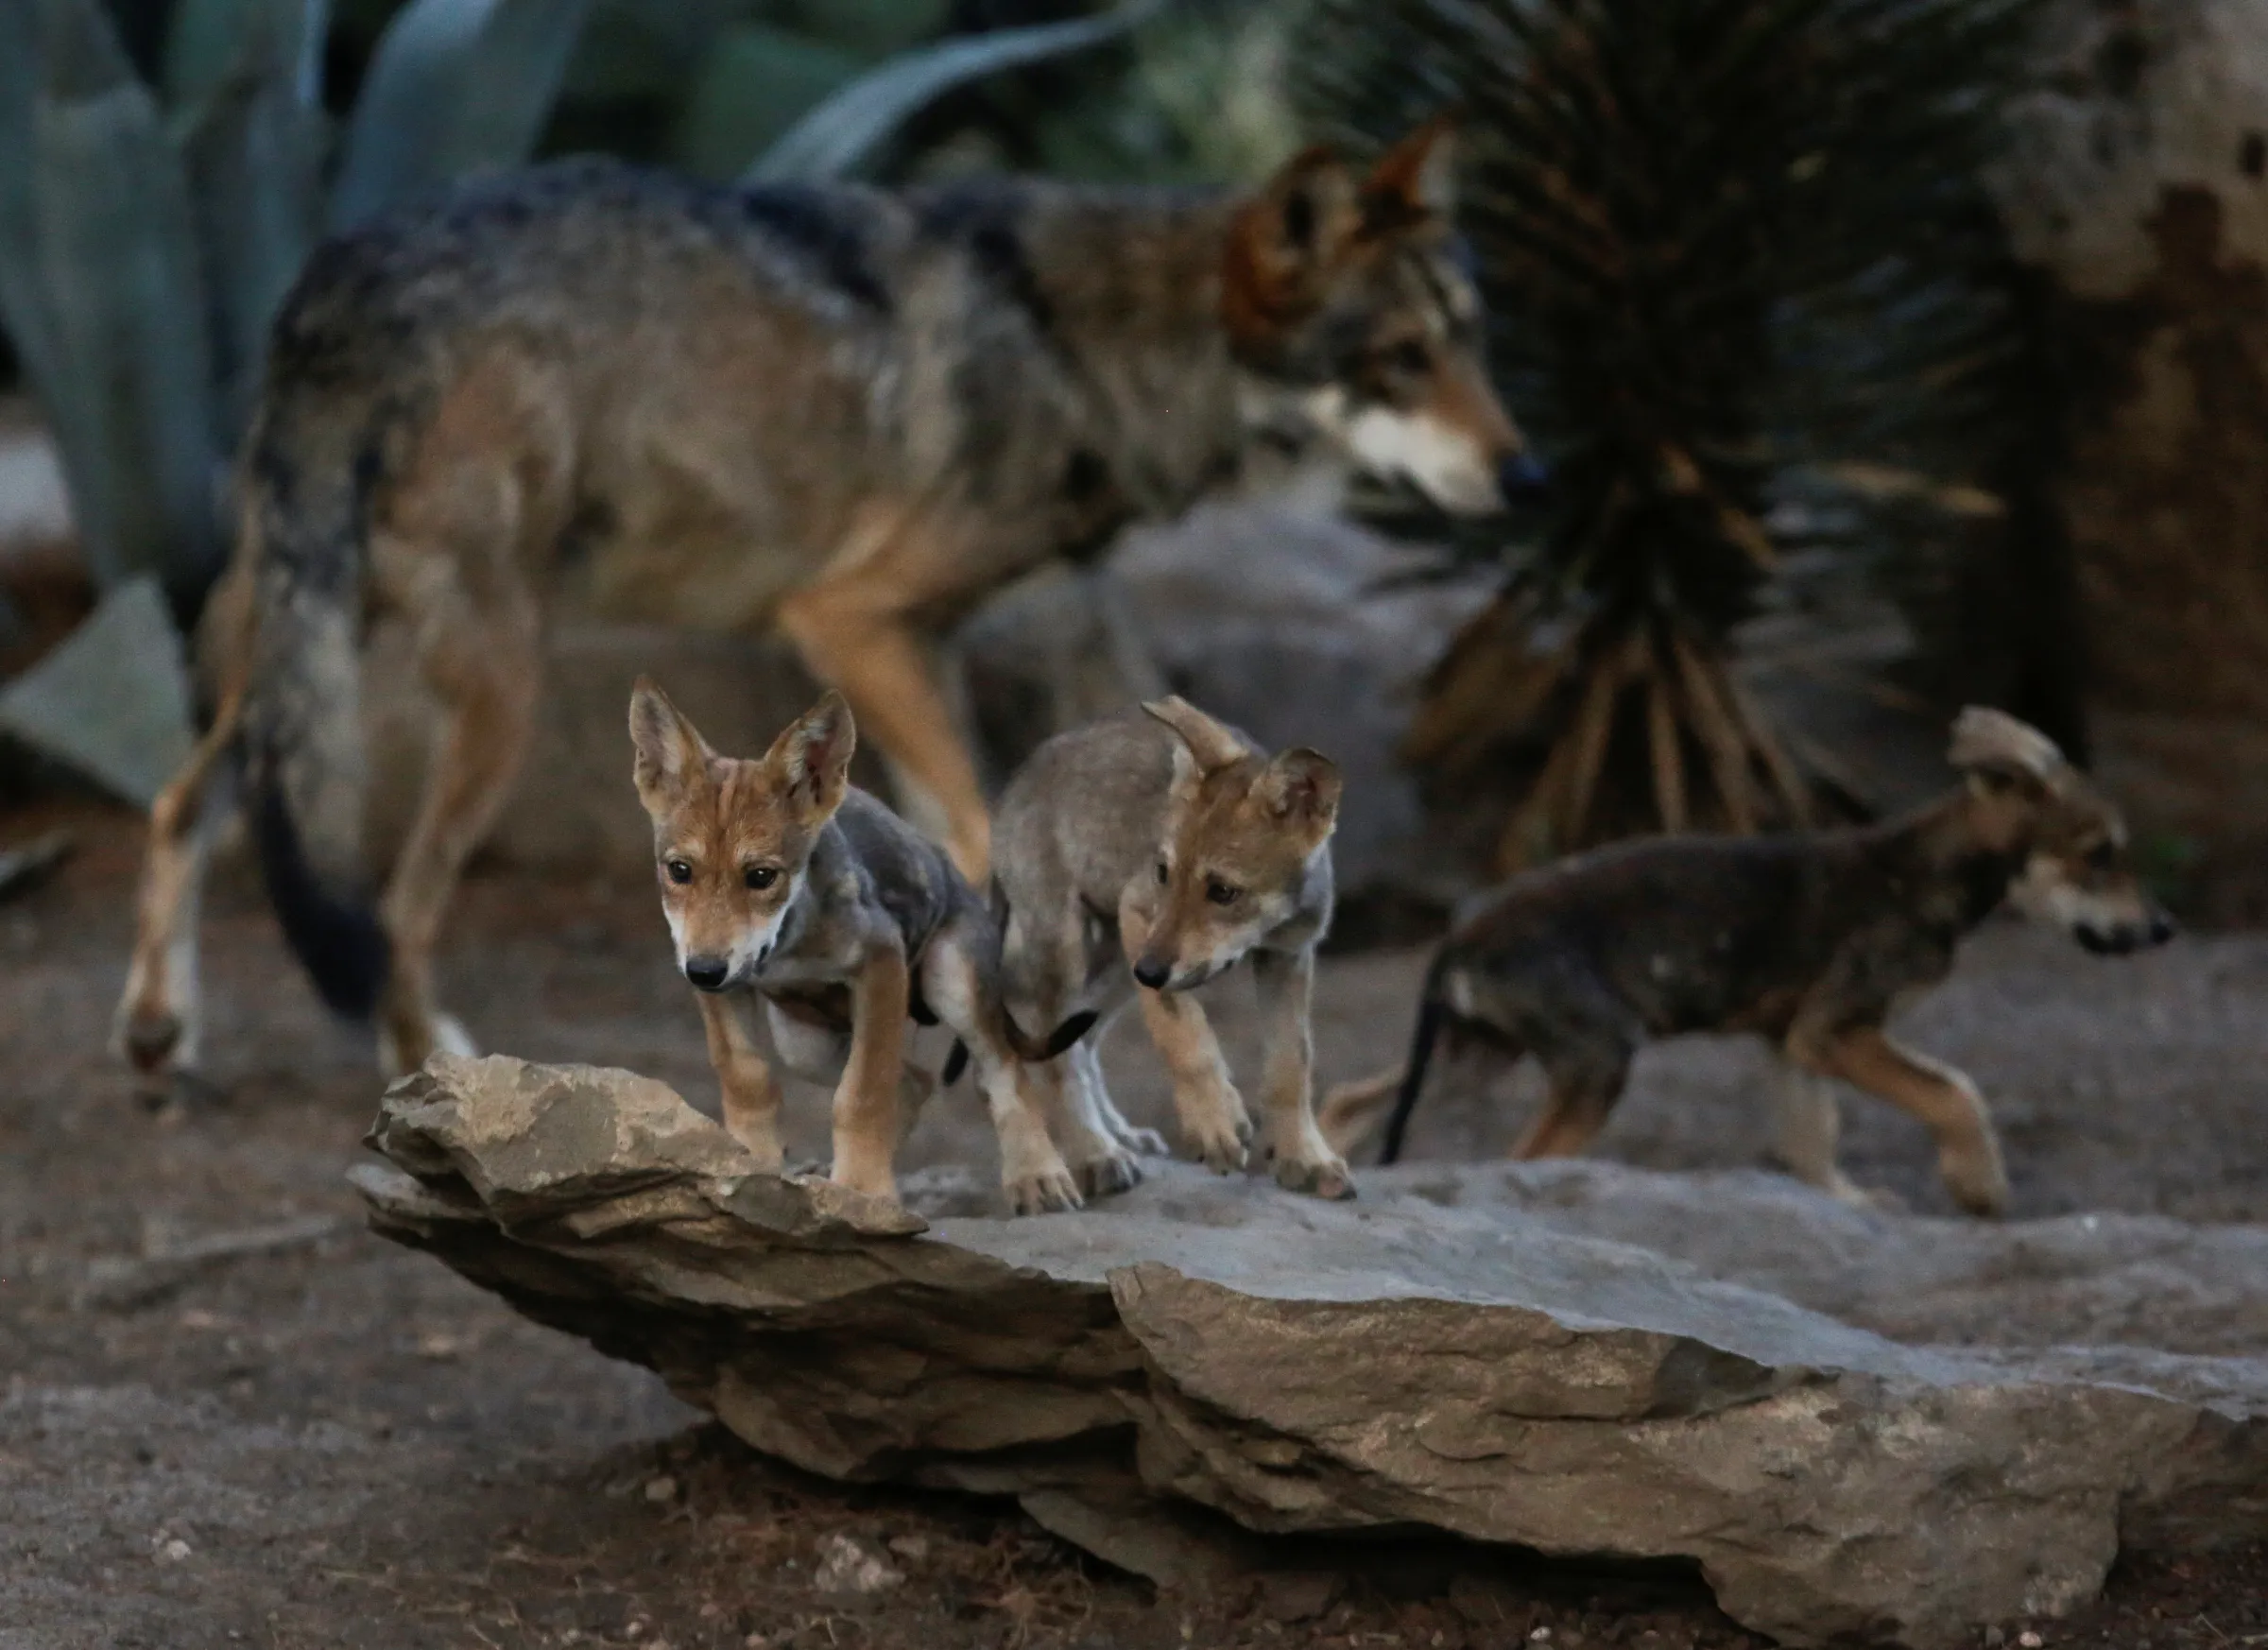 Mexican gray wolf cubs, an endangered native species, are seen in their enclosure at the Museo del Desierto in Saltillo, Mexico July 2, 2020. REUTERS/Daniel Becerril